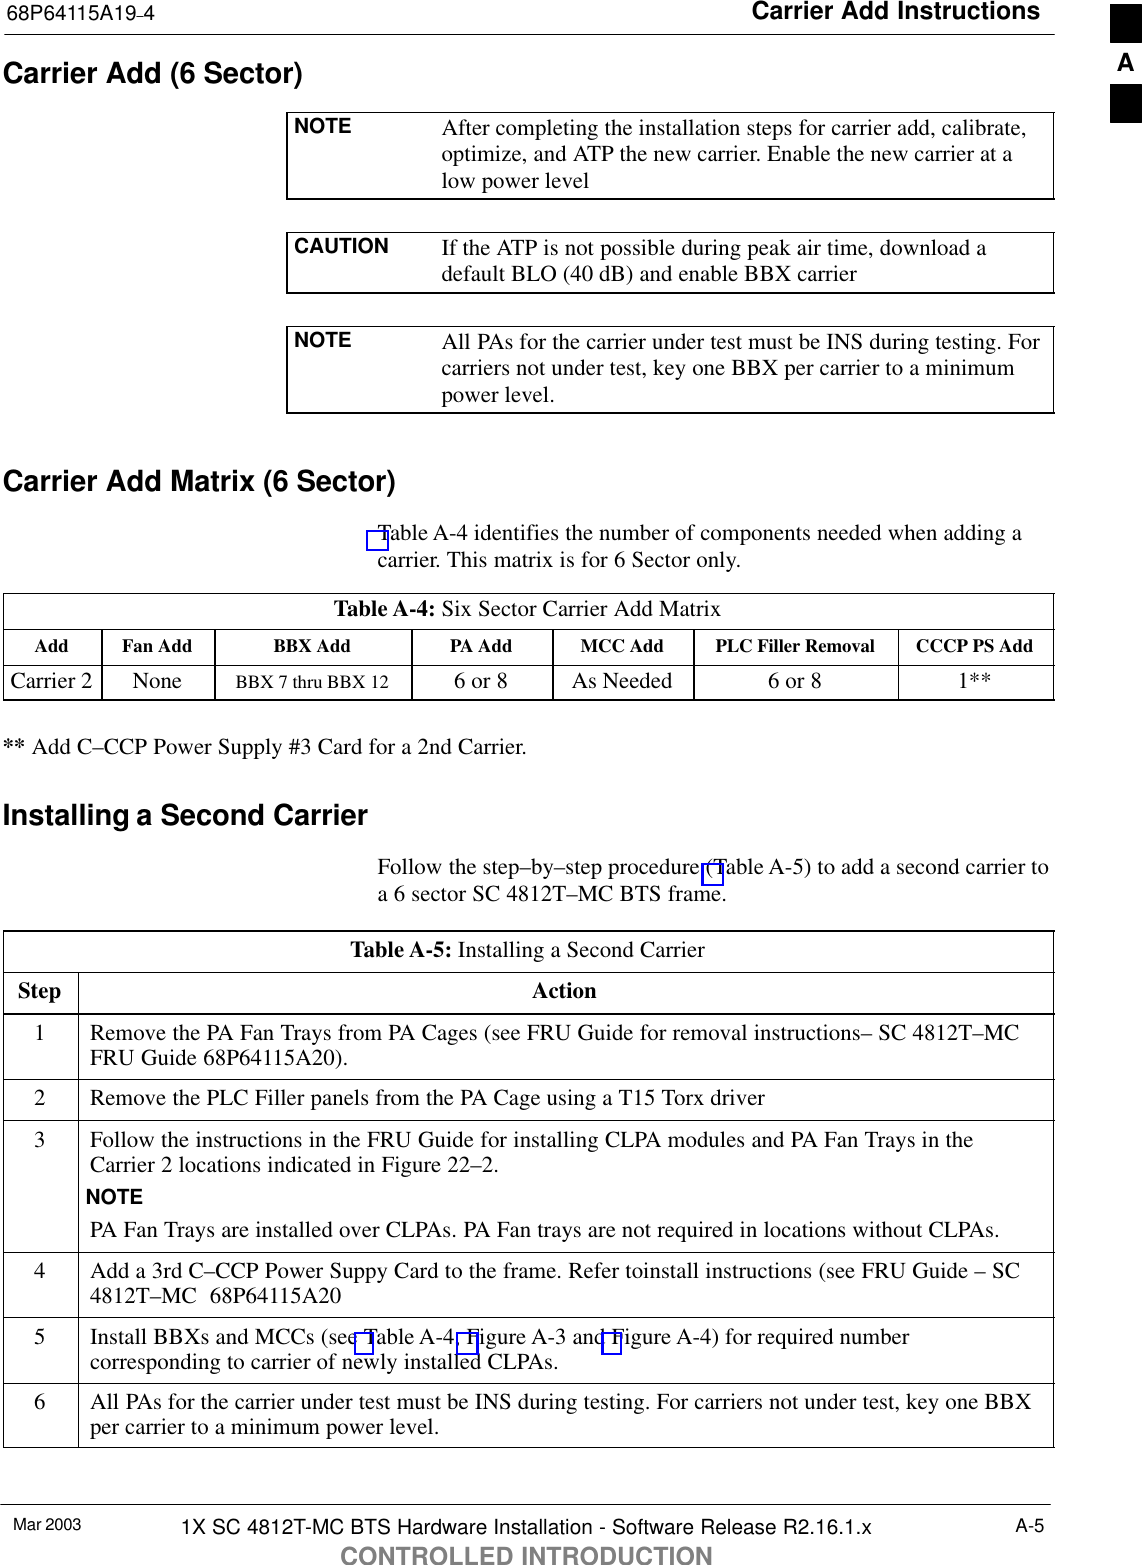 Carrier Add Instructions68P64115A19–4Mar 2003 1X SC 4812T-MC BTS Hardware Installation - Software Release R2.16.1.xCONTROLLED INTRODUCTIONA-5Carrier Add (6 Sector)NOTE After completing the installation steps for carrier add, calibrate,optimize, and ATP the new carrier. Enable the new carrier at alow power levelCAUTION If the ATP is not possible during peak air time, download adefault BLO (40 dB) and enable BBX carrierNOTE All PAs for the carrier under test must be INS during testing. Forcarriers not under test, key one BBX per carrier to a minimumpower level.Carrier Add Matrix (6 Sector)Table A-4 identifies the number of components needed when adding acarrier. This matrix is for 6 Sector only.Table A-4: Six Sector Carrier Add MatrixAdd Fan Add BBX Add PA Add MCC Add PLC Filler Removal CCCP PS AddCarrier 2 None BBX 7 thru BBX 12 6 or 8 As Needed 6 or 8 1**** Add C–CCP Power Supply #3 Card for a 2nd Carrier.Installing a Second CarrierFollow the step–by–step procedure (Table A-5) to add a second carrier toa 6 sector SC 4812T–MC BTS frame.Table A-5: Installing a Second CarrierStep Action1Remove the PA Fan Trays from PA Cages (see FRU Guide for removal instructions– SC 4812T–MCFRU Guide 68P64115A20).2Remove the PLC Filler panels from the PA Cage using a T15 Torx driver3Follow the instructions in the FRU Guide for installing CLPA modules and PA Fan Trays in theCarrier 2 locations indicated in Figure 22–2.NOTEPA Fan Trays are installed over CLPAs. PA Fan trays are not required in locations without CLPAs.4Add a 3rd C–CCP Power Suppy Card to the frame. Refer toinstall instructions (see FRU Guide – SC4812T–MC  68P64115A205Install BBXs and MCCs (see Table A-4, Figure A-3 and Figure A-4) for required numbercorresponding to carrier of newly installed CLPAs.6All PAs for the carrier under test must be INS during testing. For carriers not under test, key one BBXper carrier to a minimum power level.A